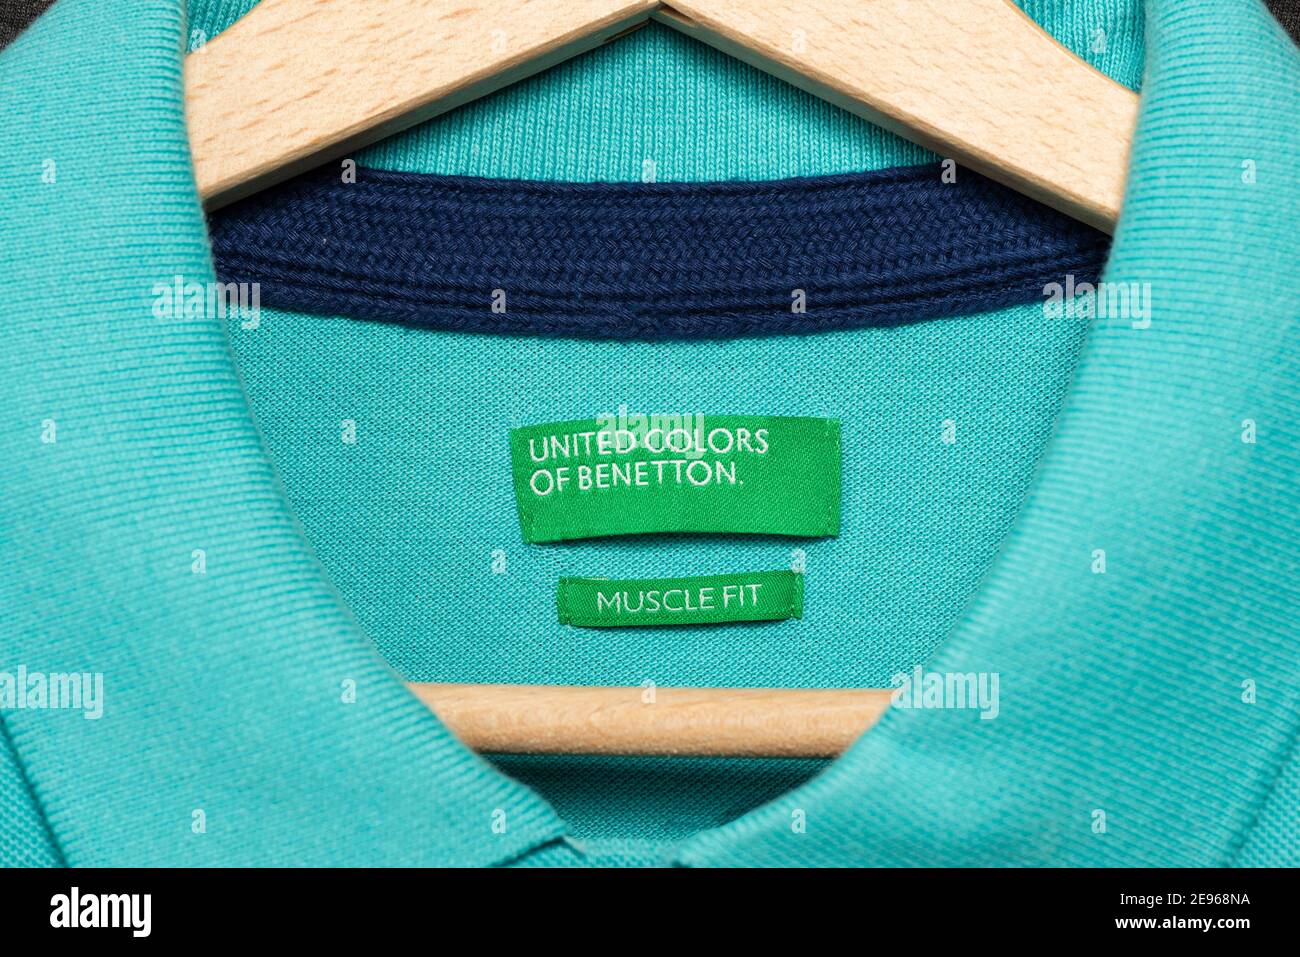 Evaluatie residentie balans United Colors of Benetton Muscle Fit green label on teal tee shirt hanging  on wooden hanger Stock Photo - Alamy